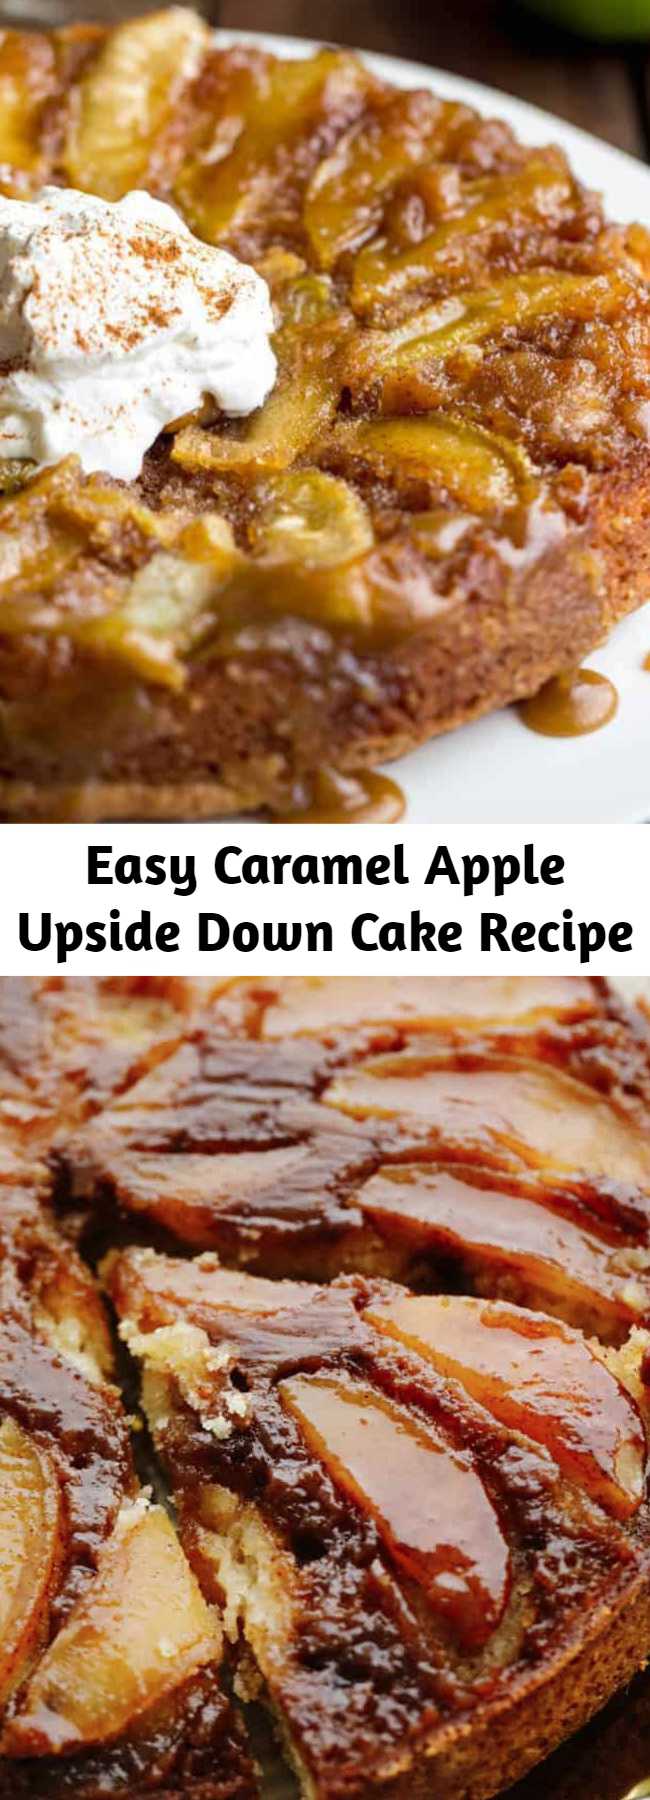 Easy Caramel Apple Upside Down Cake Recipe - A delicious apple upside down cake that is perfectly moist and baked with apples with a brown sugar caramel glaze! This is one of the best cakes ever!